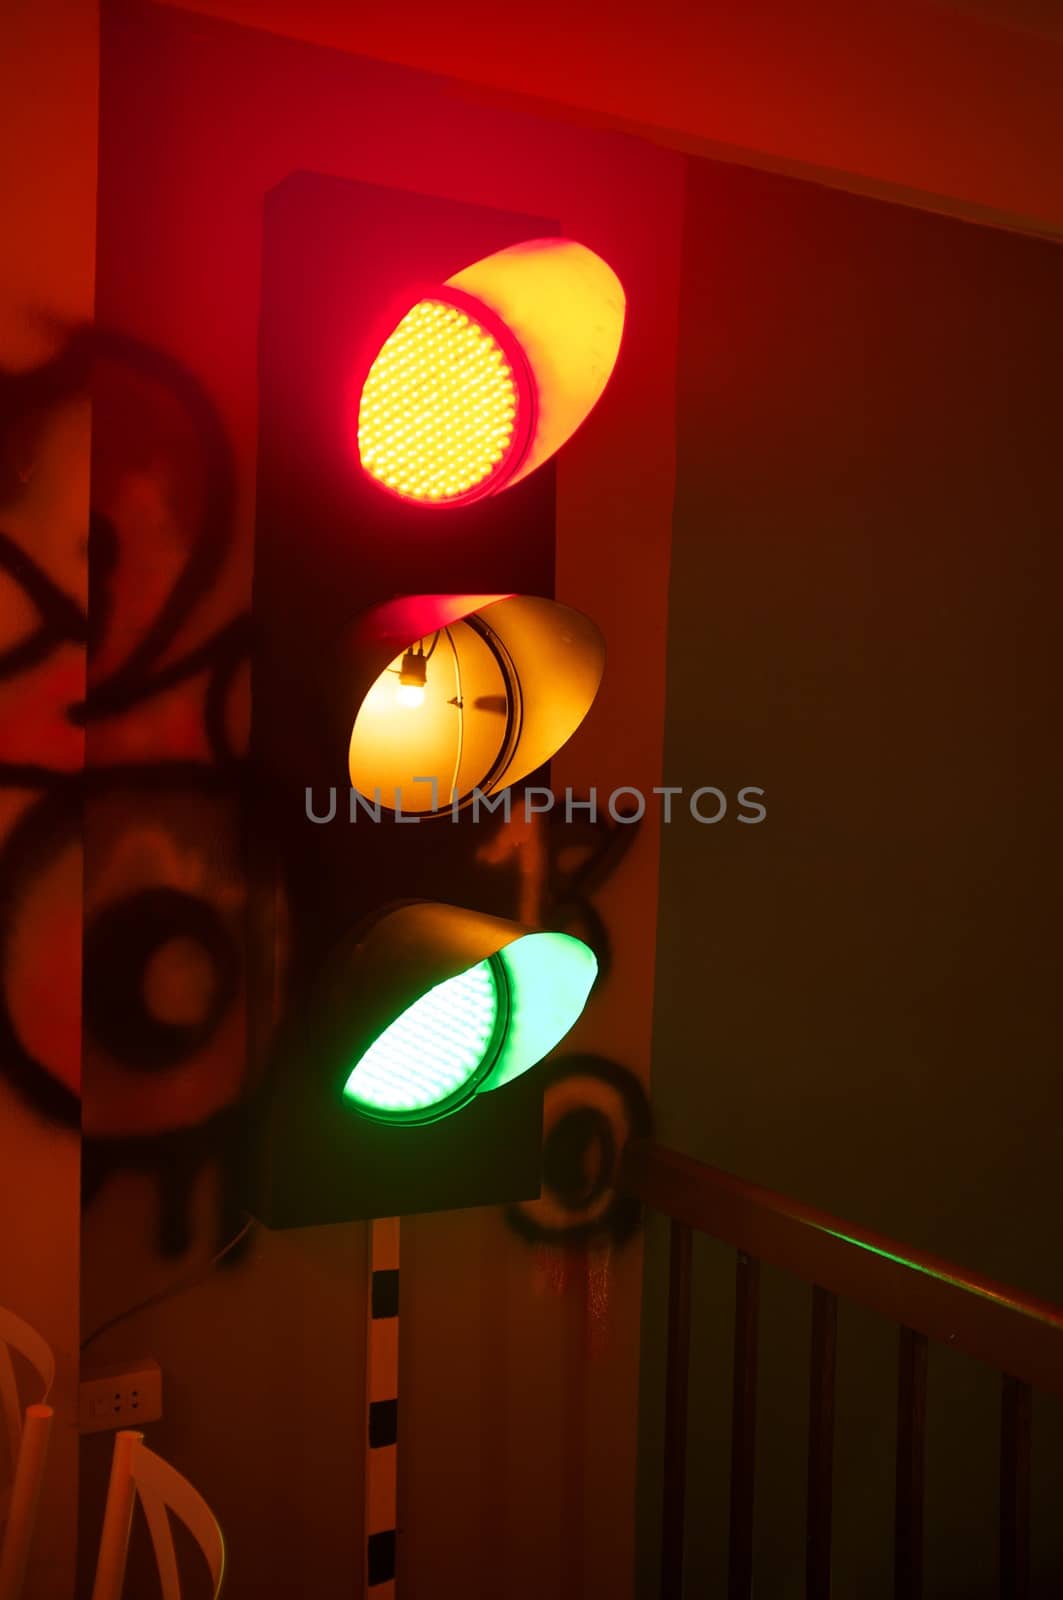 Traffic light glowing of multicolor of green, red and yellow by Hepjam